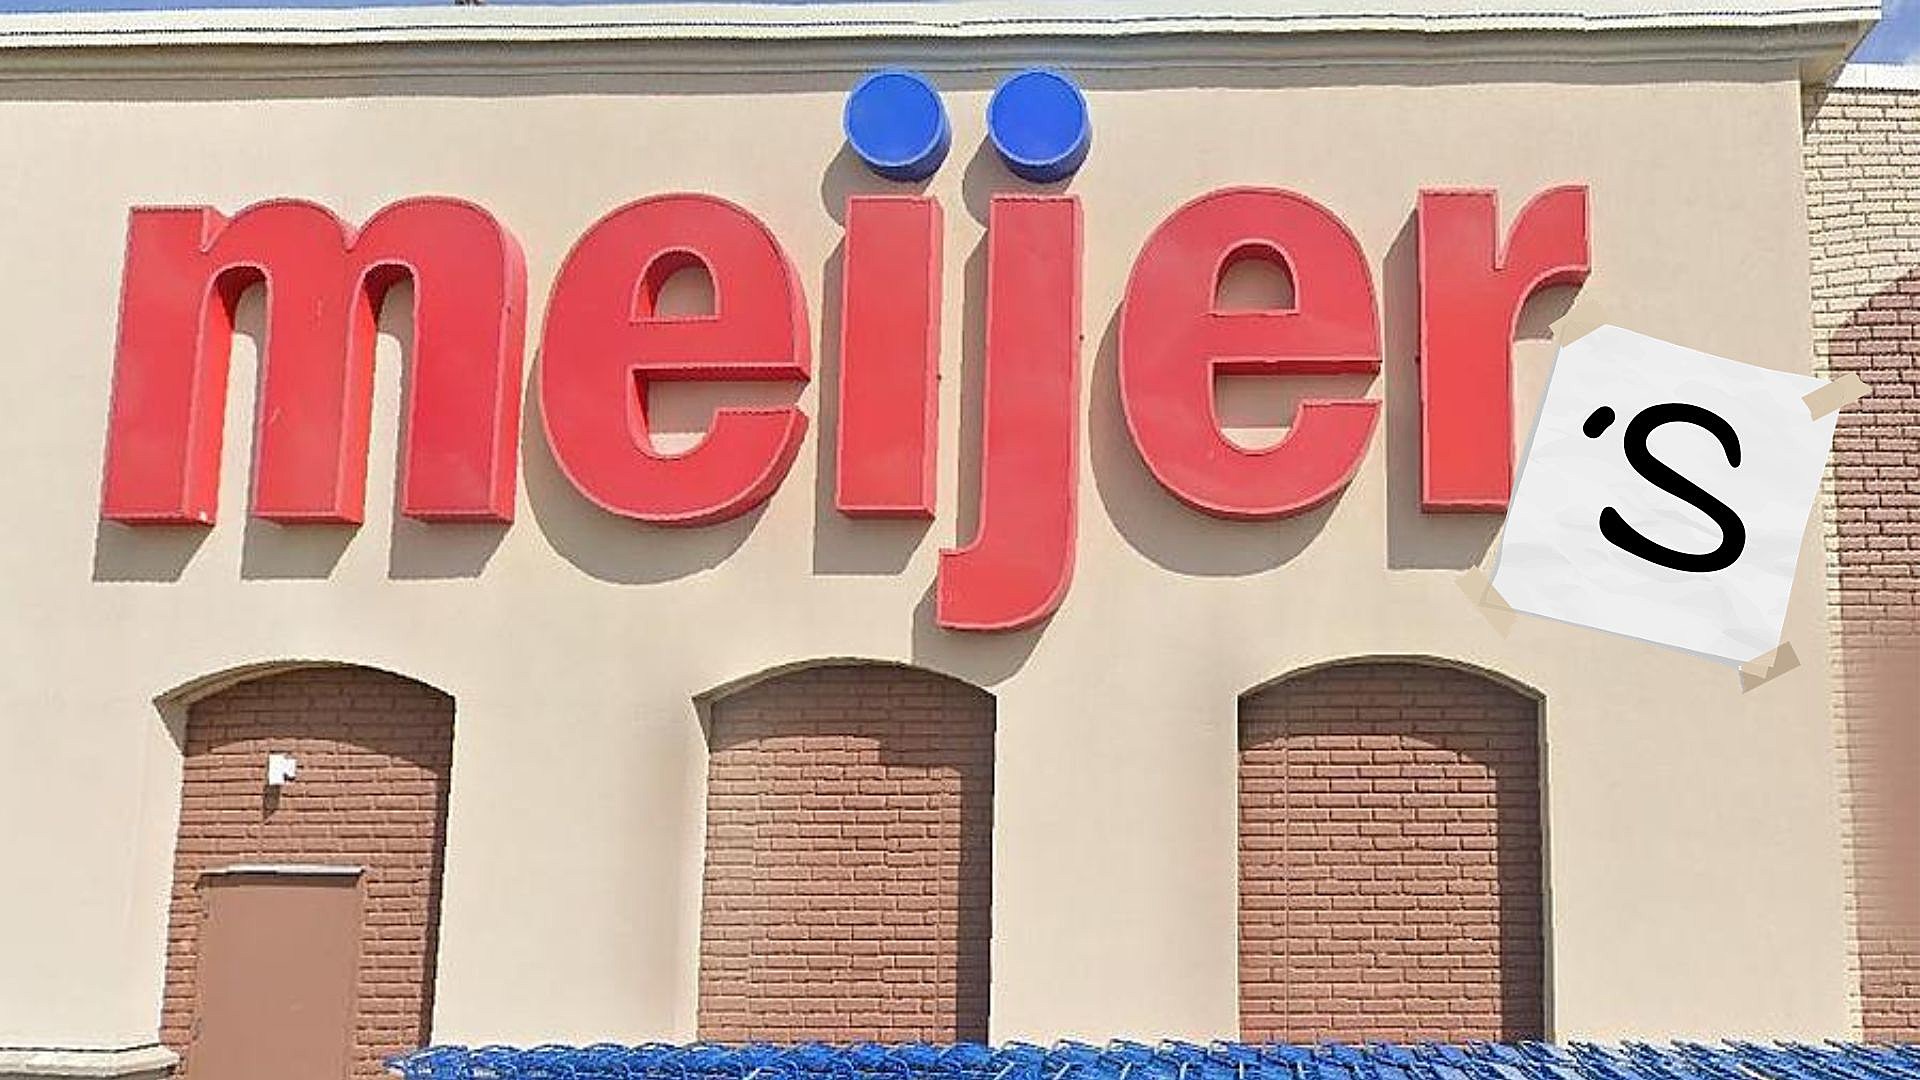 Sold the company : r/meijer